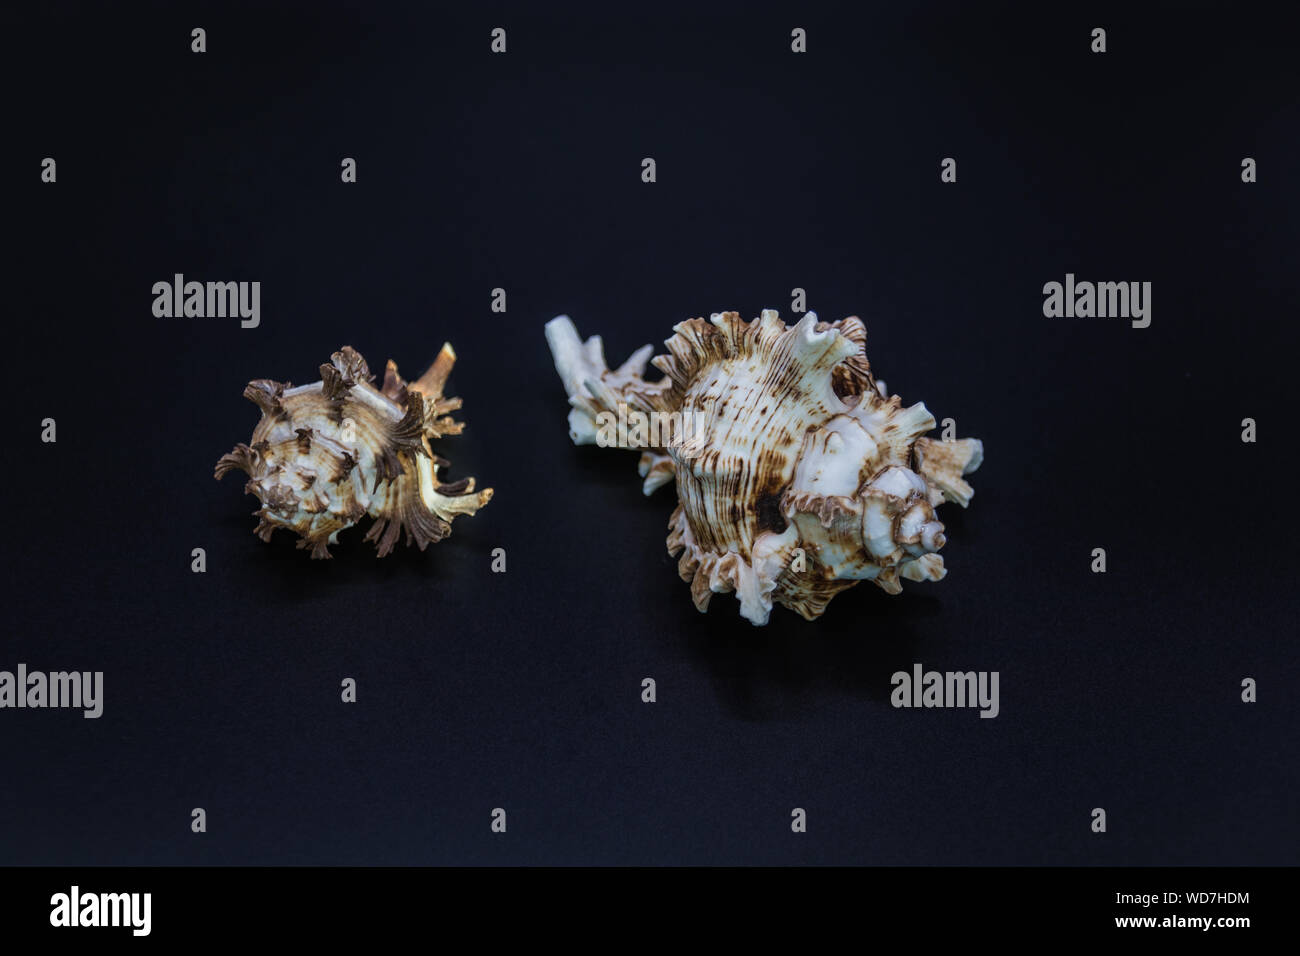 Shells of the predatory sea snails of family Muricidae, also known as murex snails or rock snails on the black background Stock Photo